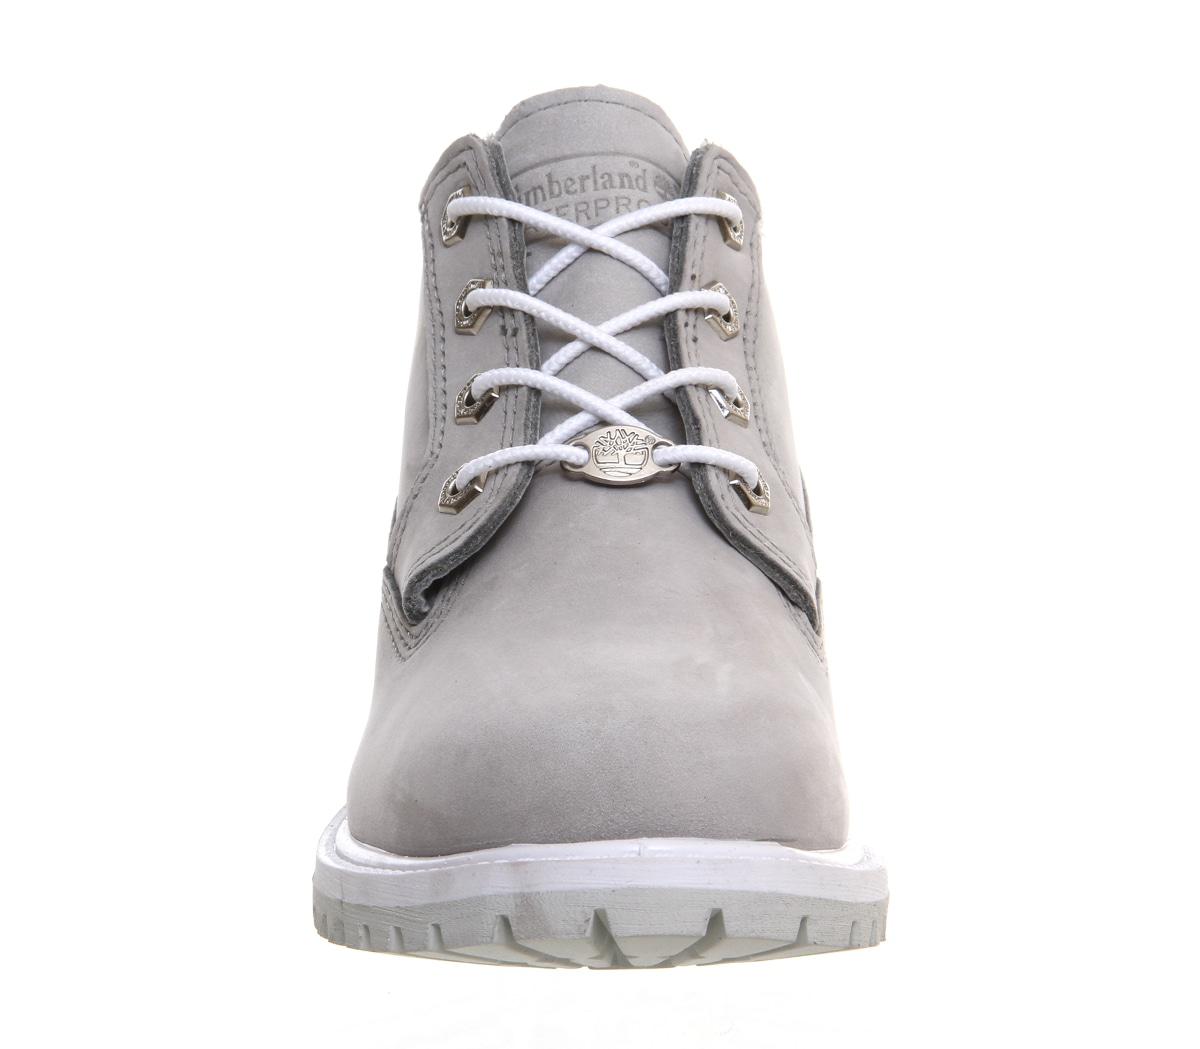 Timberland Nellie Chukka Double Waterproof Boots in Grey (Gray) - Lyst